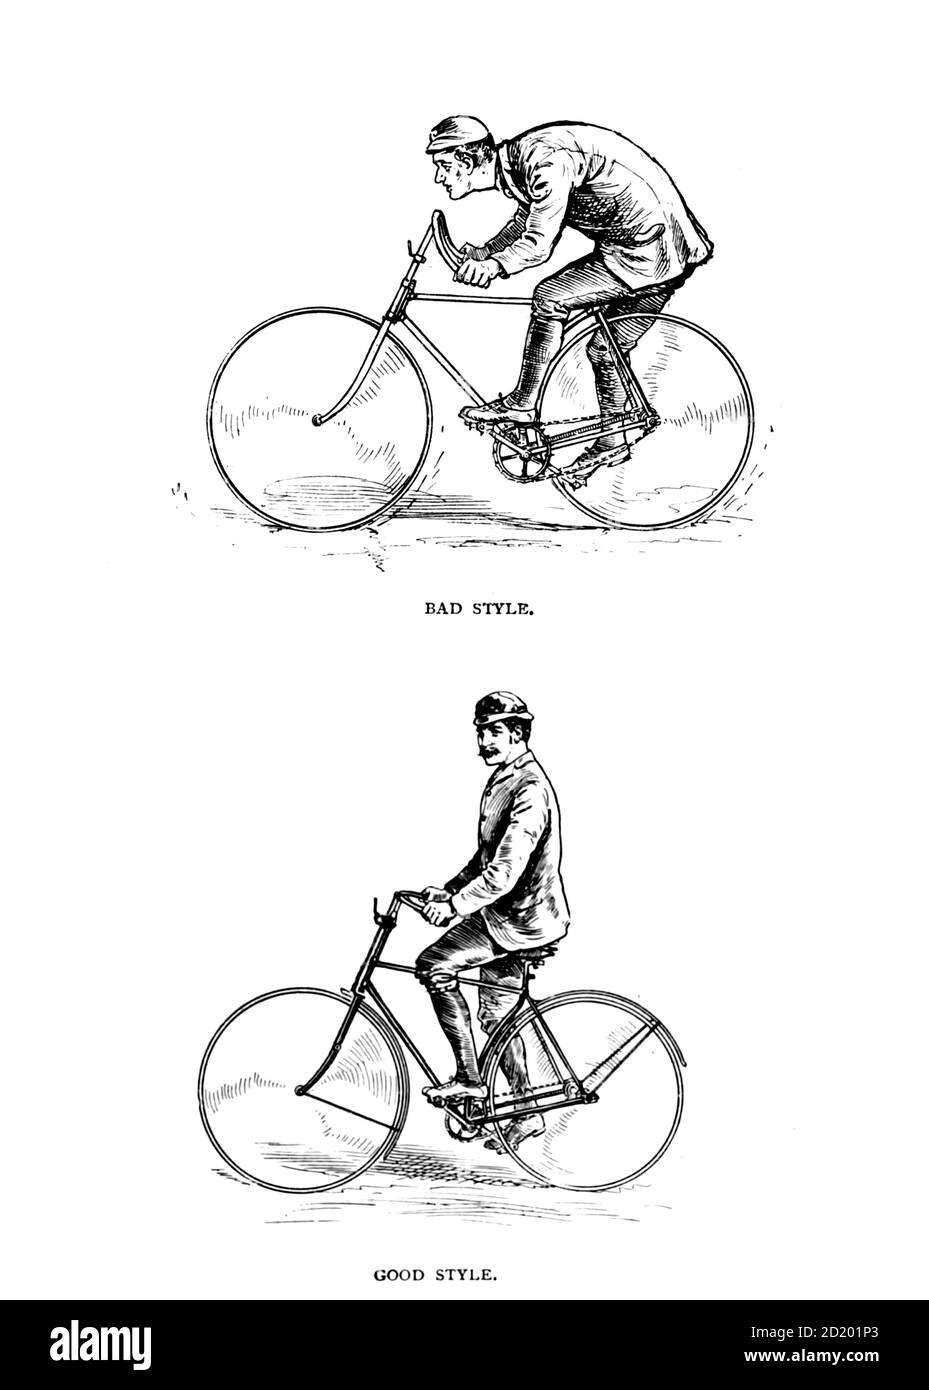 Good and Bad Cycling Style from 'Cycling' by the Right Hon. Earl of Albemarle, William Coutts Keppel, (1832-1894) and George Lacy Hillier (1856-1941); Joseph Pennell (1857-1926) Published by London and Bombay : Longmans, Green and co. In 1896. Die Badminton Library Stockfoto